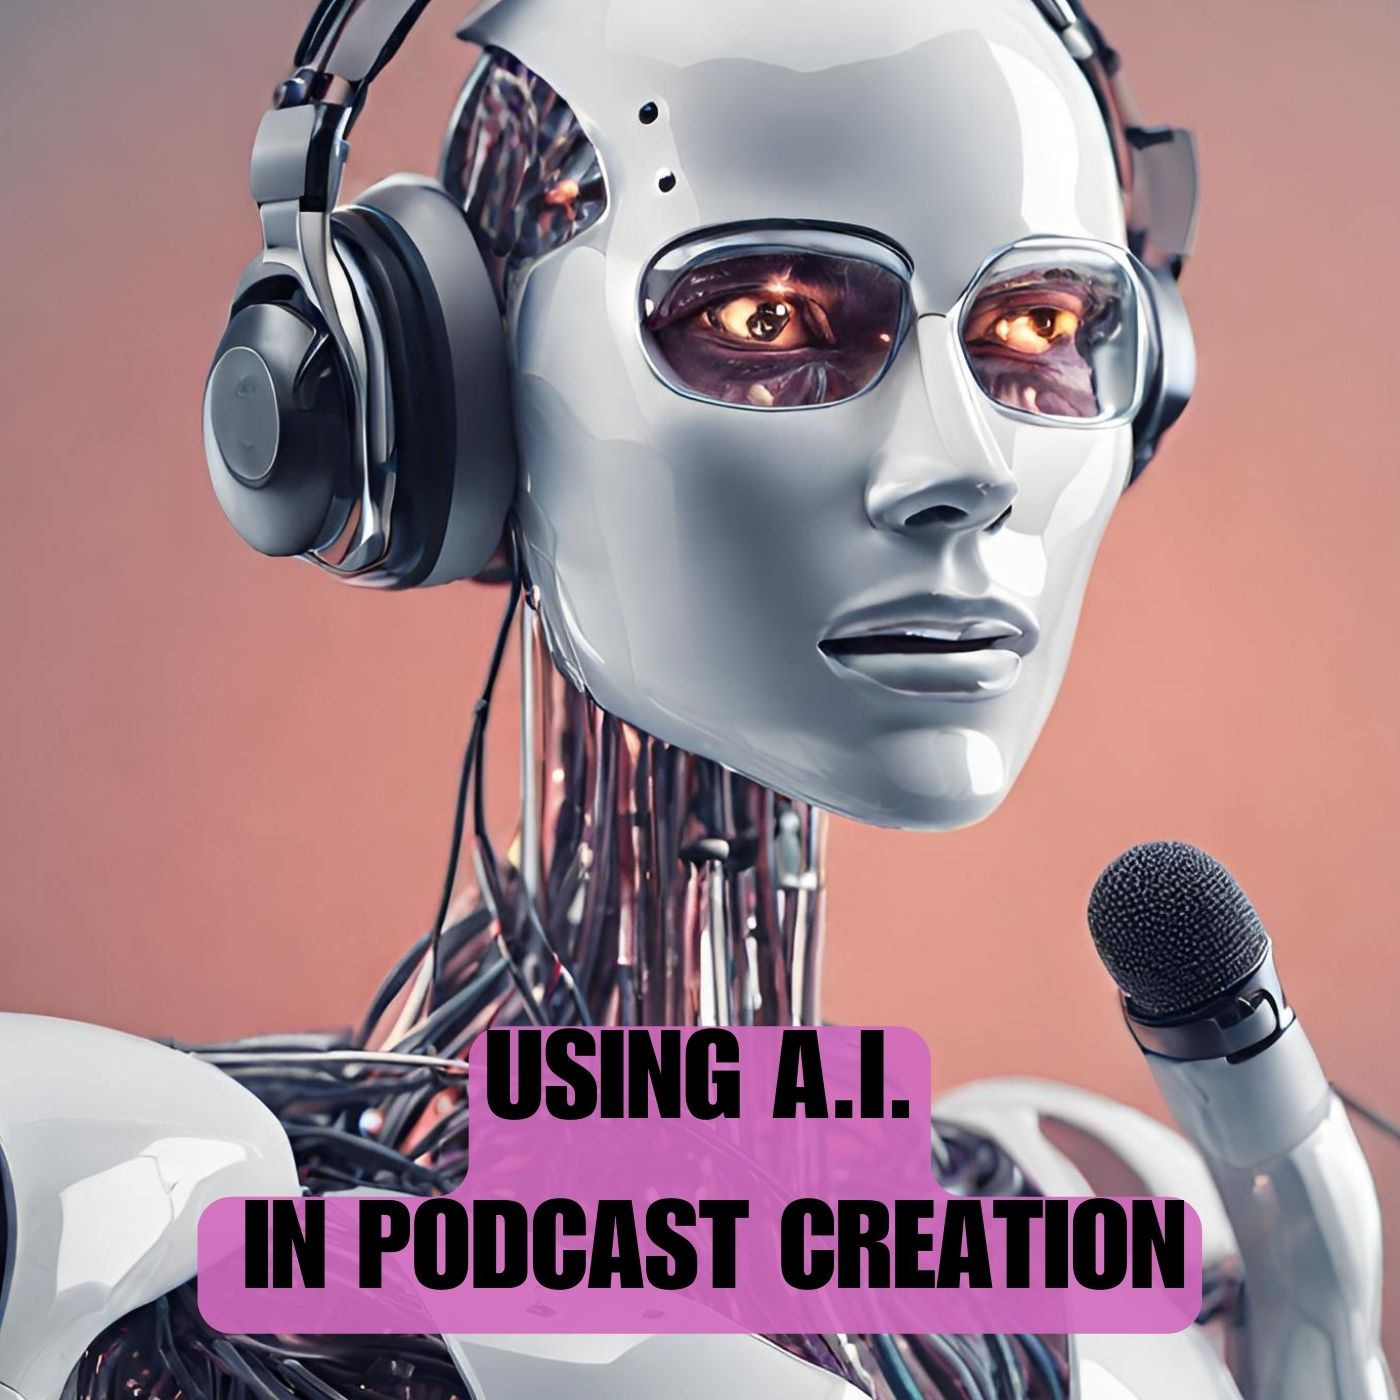 Using AI in podcasting creation